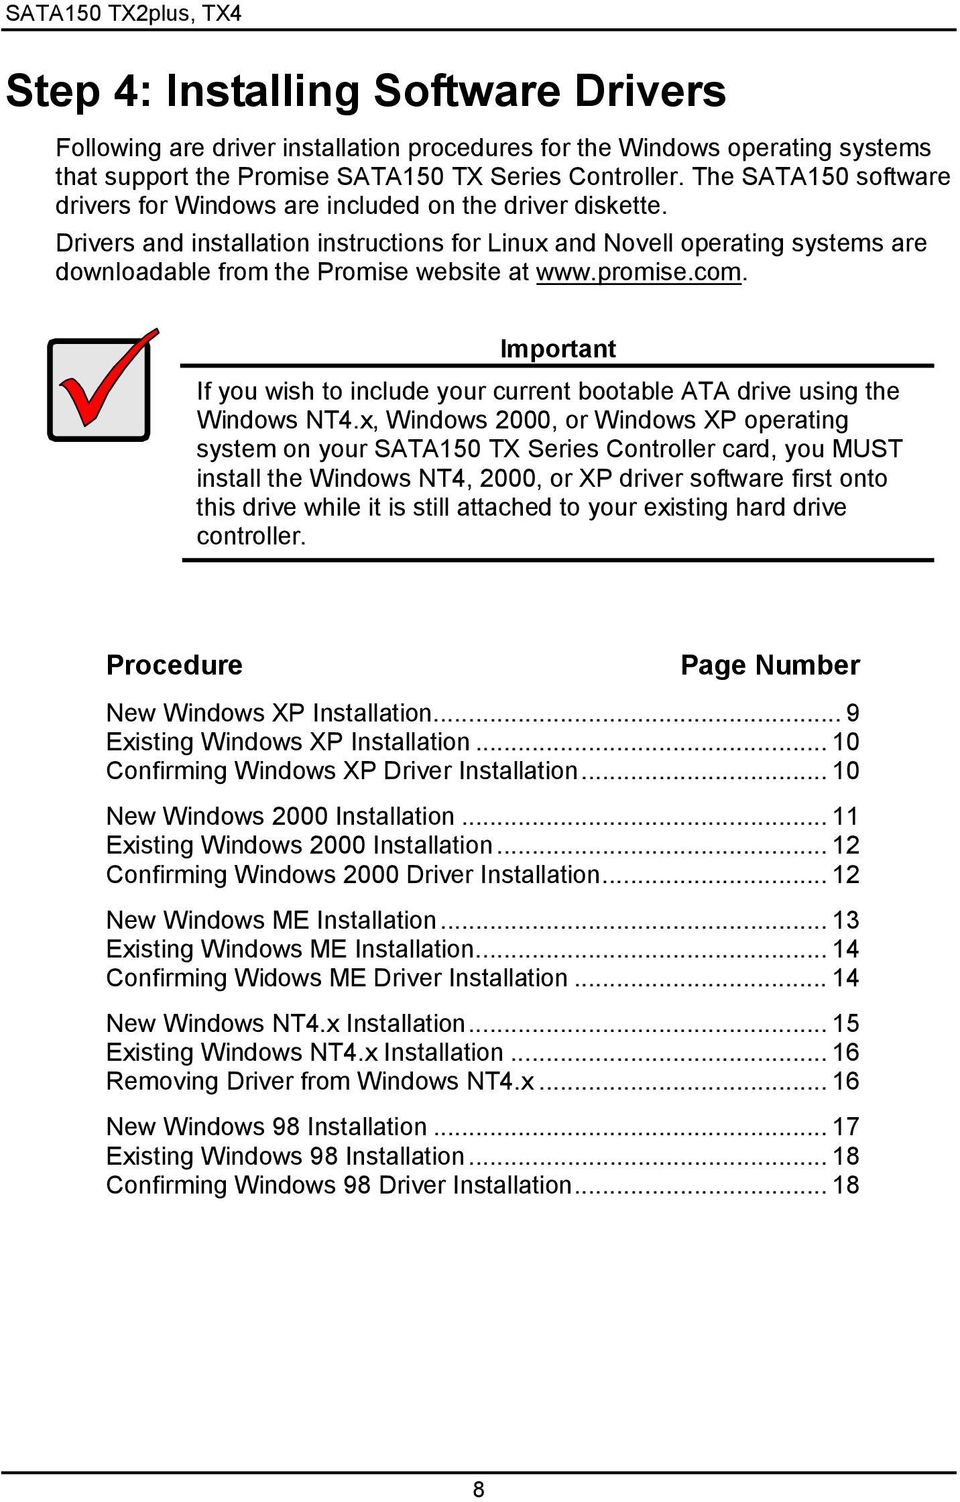 Drivers and installation instructions for Linux and Novell operating systems are downloadable from the Promise website at www.promise.com.